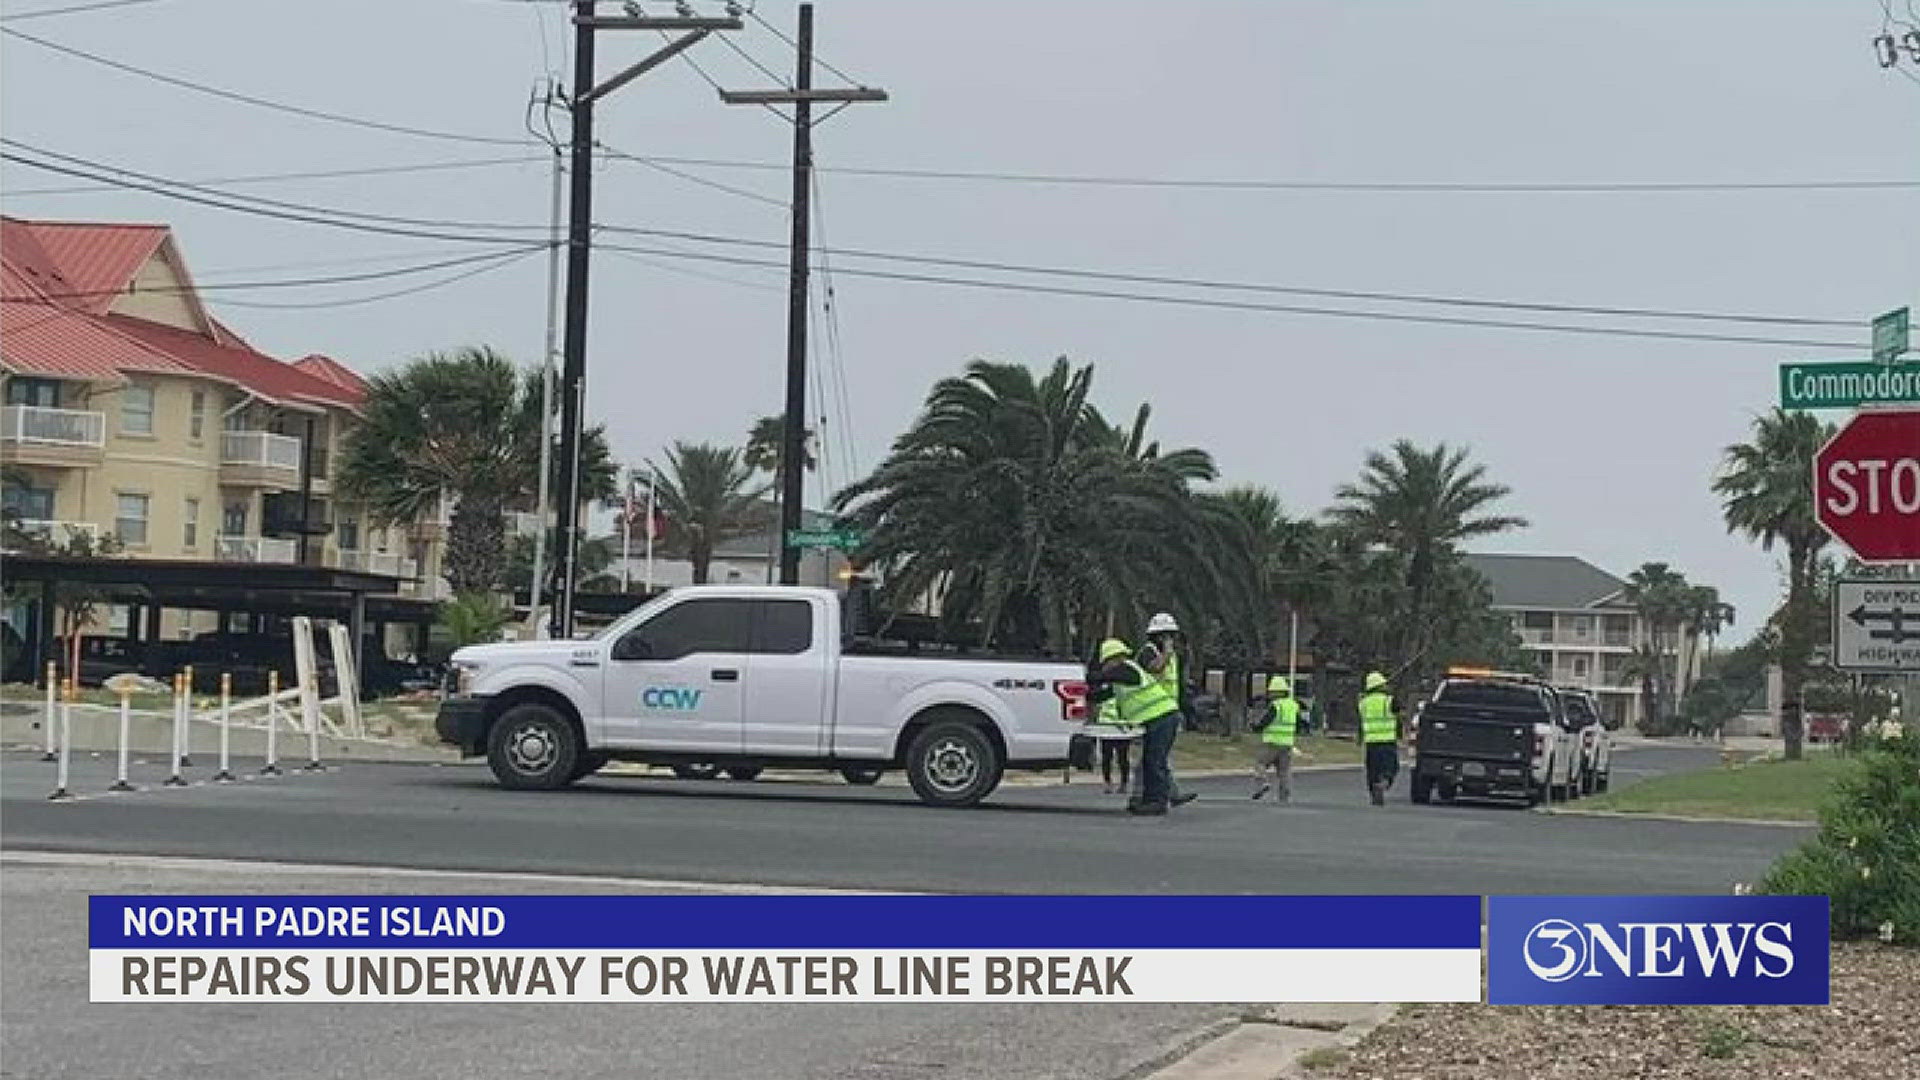 According to CCW officials, no residents are completely without water, but some do have low water pressure.